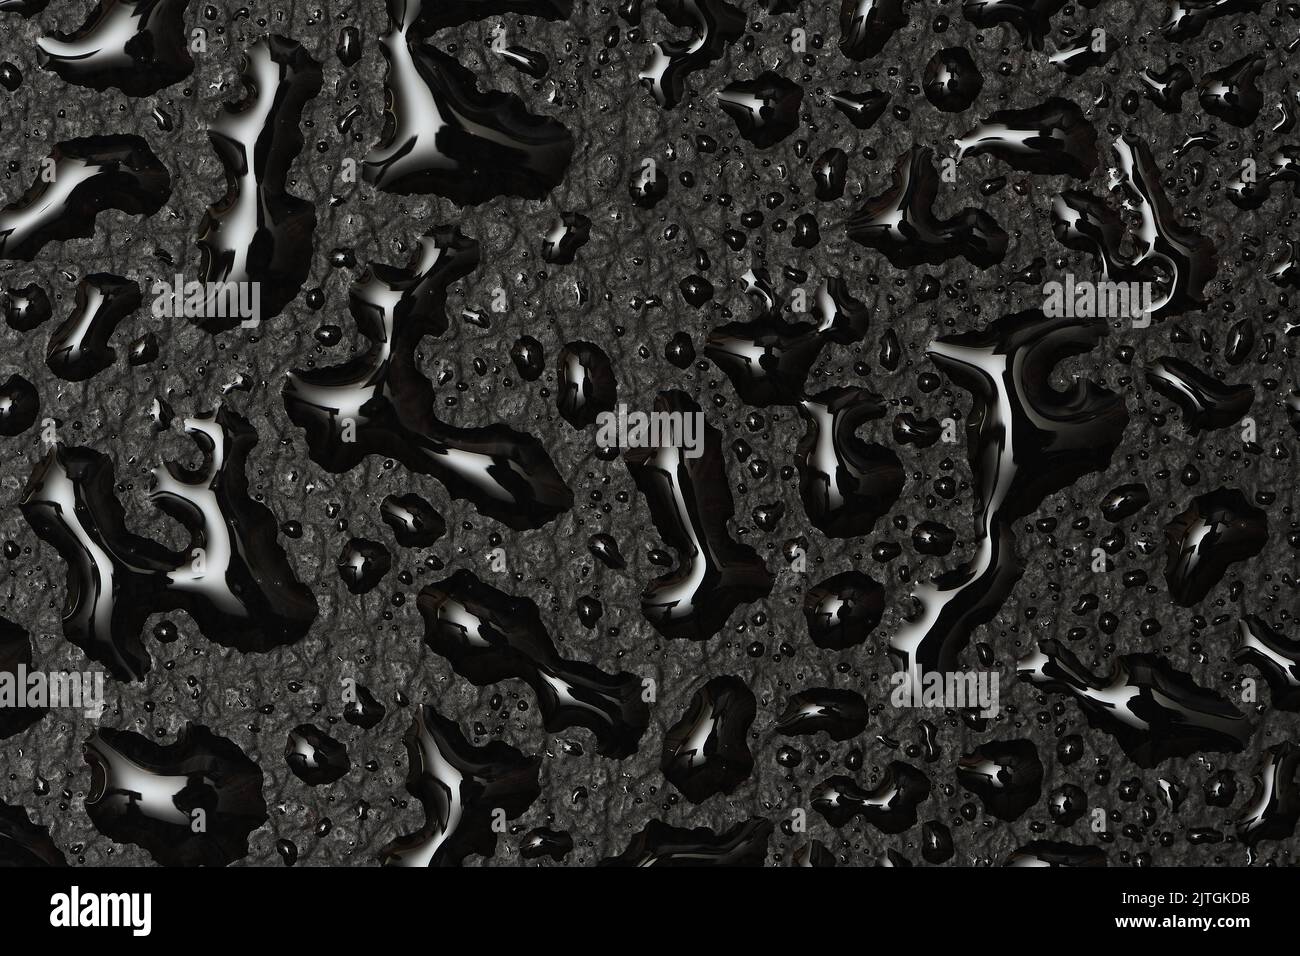 Water droplets on a black vinyl faux leather surface giving it a chrome-like, alien type of look Stock Photo